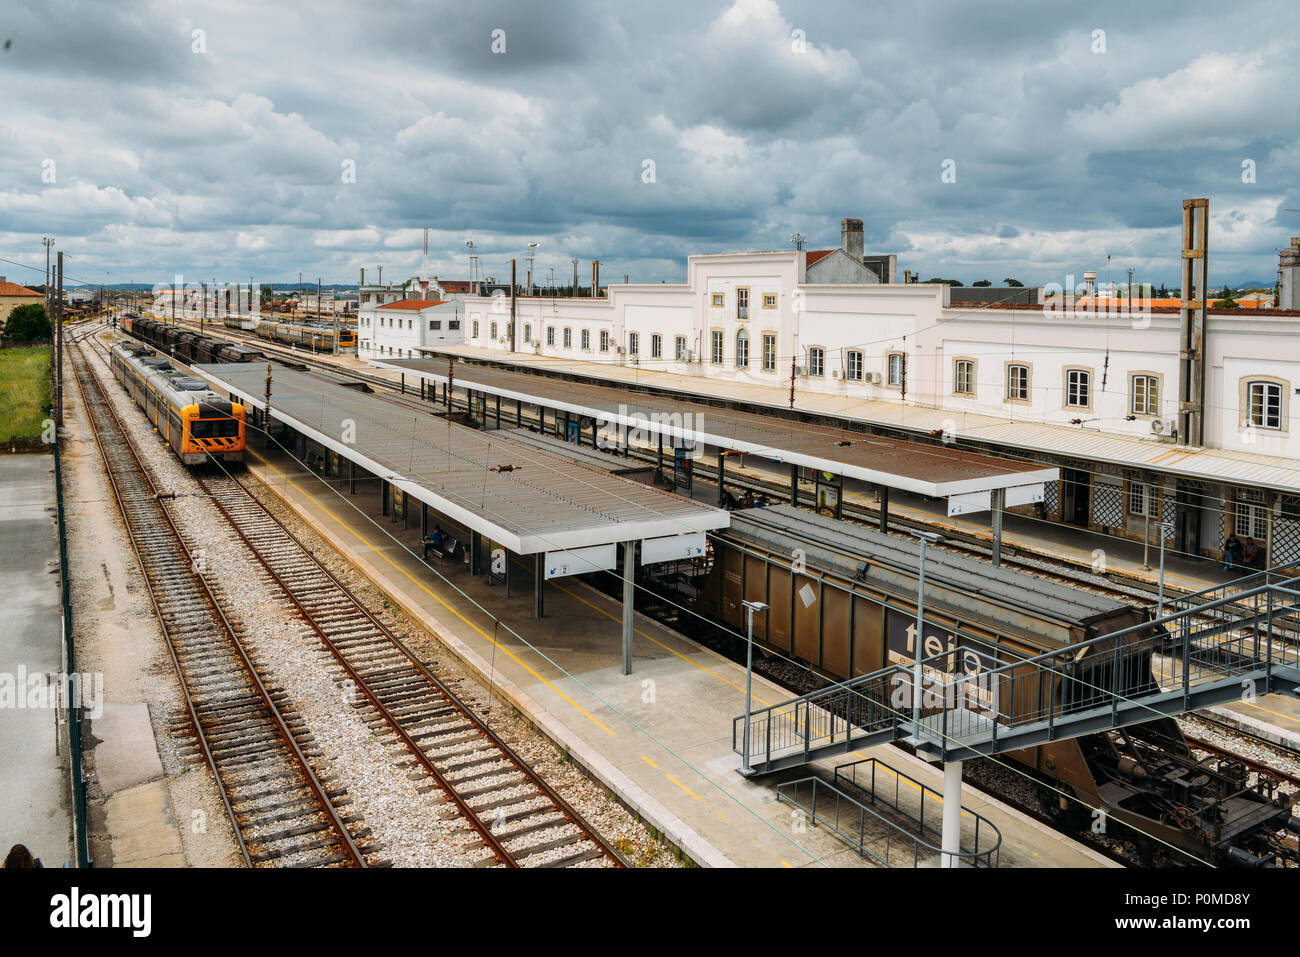 Entroncamento railroad junction in the Santarem district of Portugal. Entroncamento literally means junction in Portuguese Stock Photo